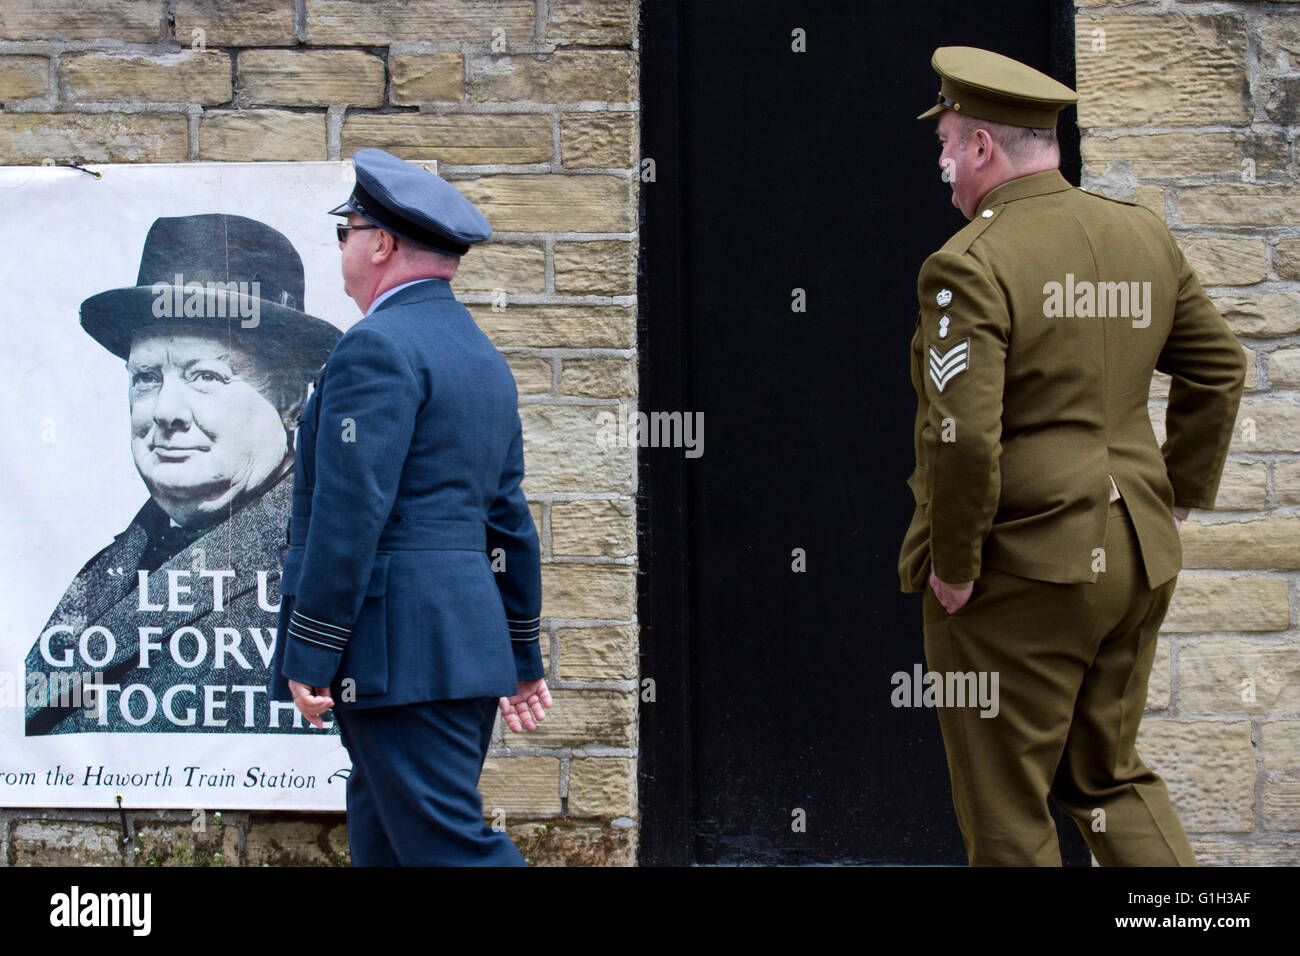 Haworth, Keighley, UK. 15th May, 2016. The Haworth 1940's weekend draws thousands of visitors to this quaint little Yorkshire village.  This year’s theme will be “Airborne” to commemorate the incredible bravery and sacrifice of the airborne allied forces. Credit:  Cernan Elias/Alamy Live News Stock Photo